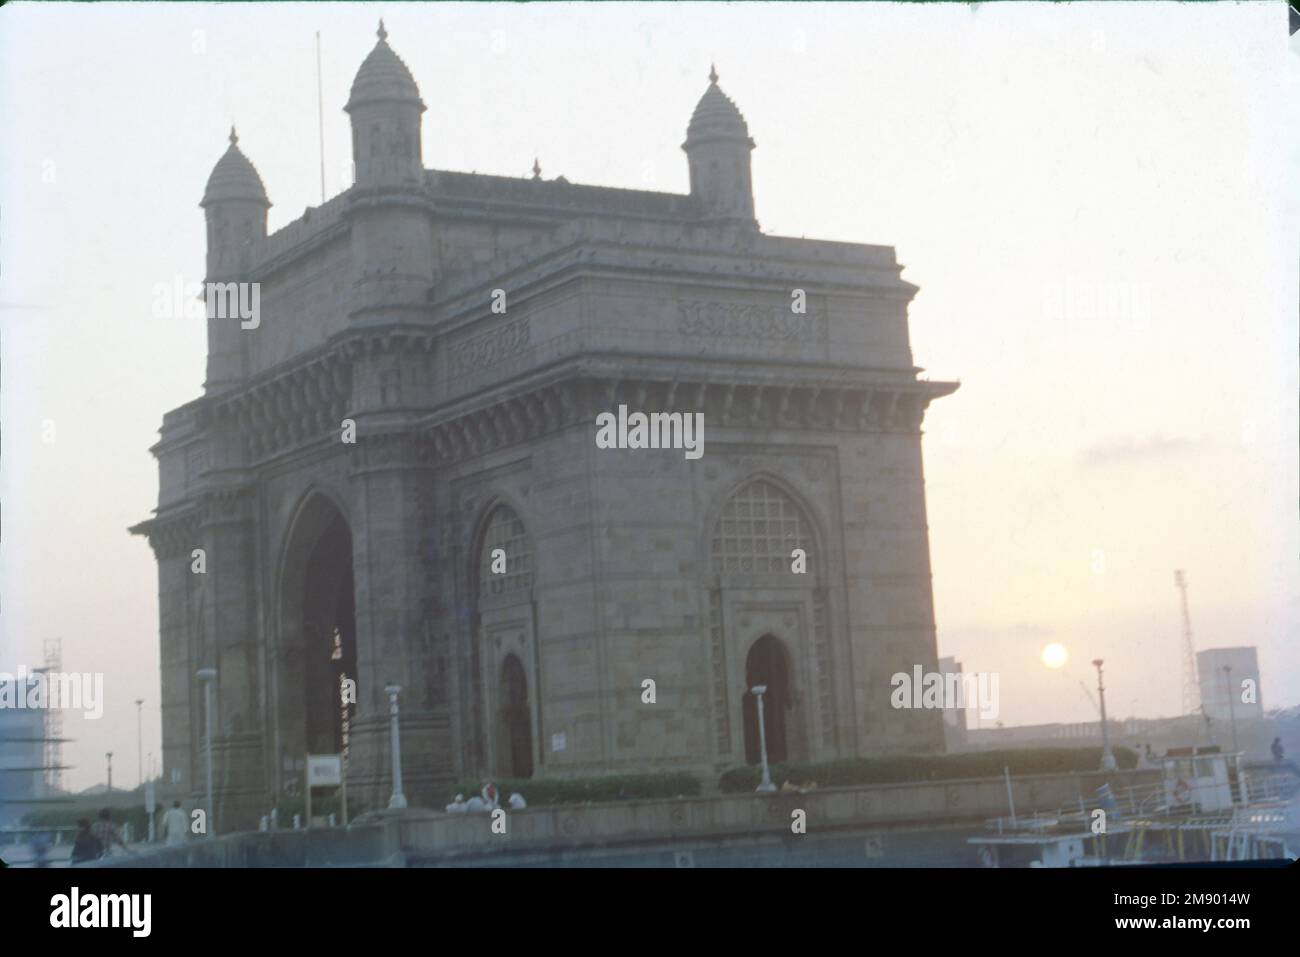 The Gateway of India is an arch-monument built in the early 20th century in the city of Mumbai, India. It was erected to commemorate the landing of King-Emperor George V, the first British monarch to visit India, in December 1911 at Strand Road near Wellington Fountain. Stock Photo